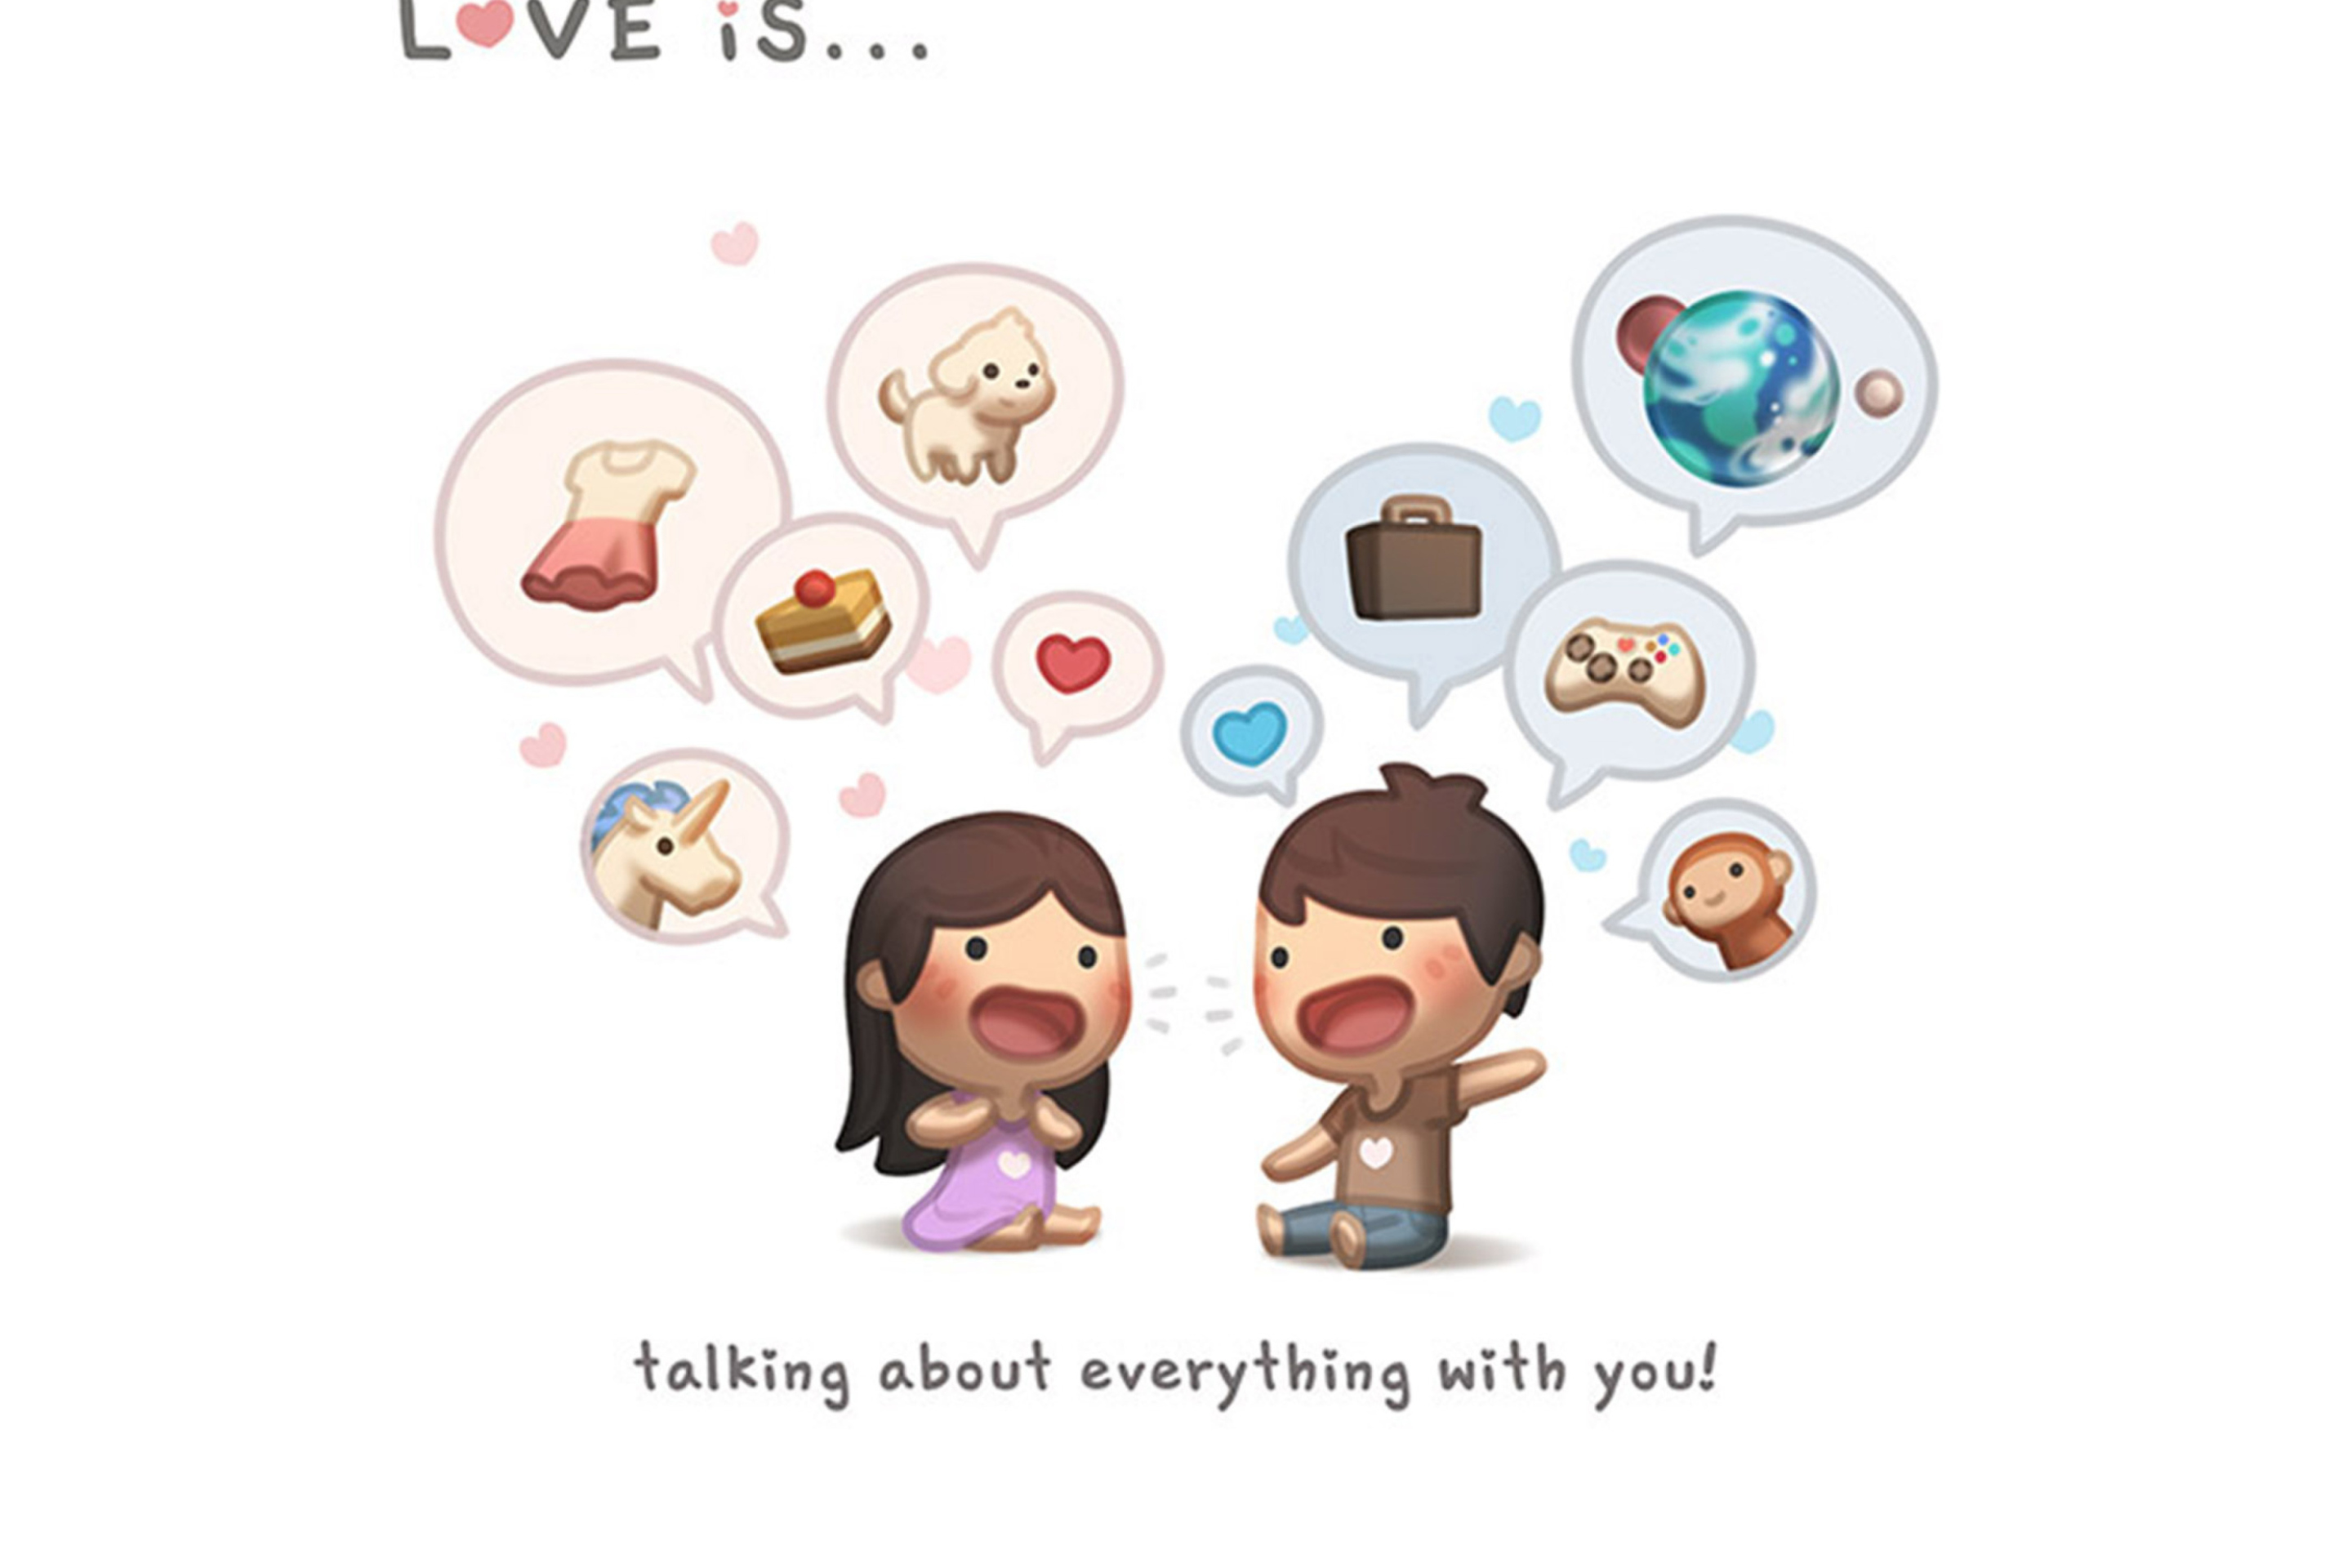 Sfondi Love Is - Talking About Everything With You 2880x1920